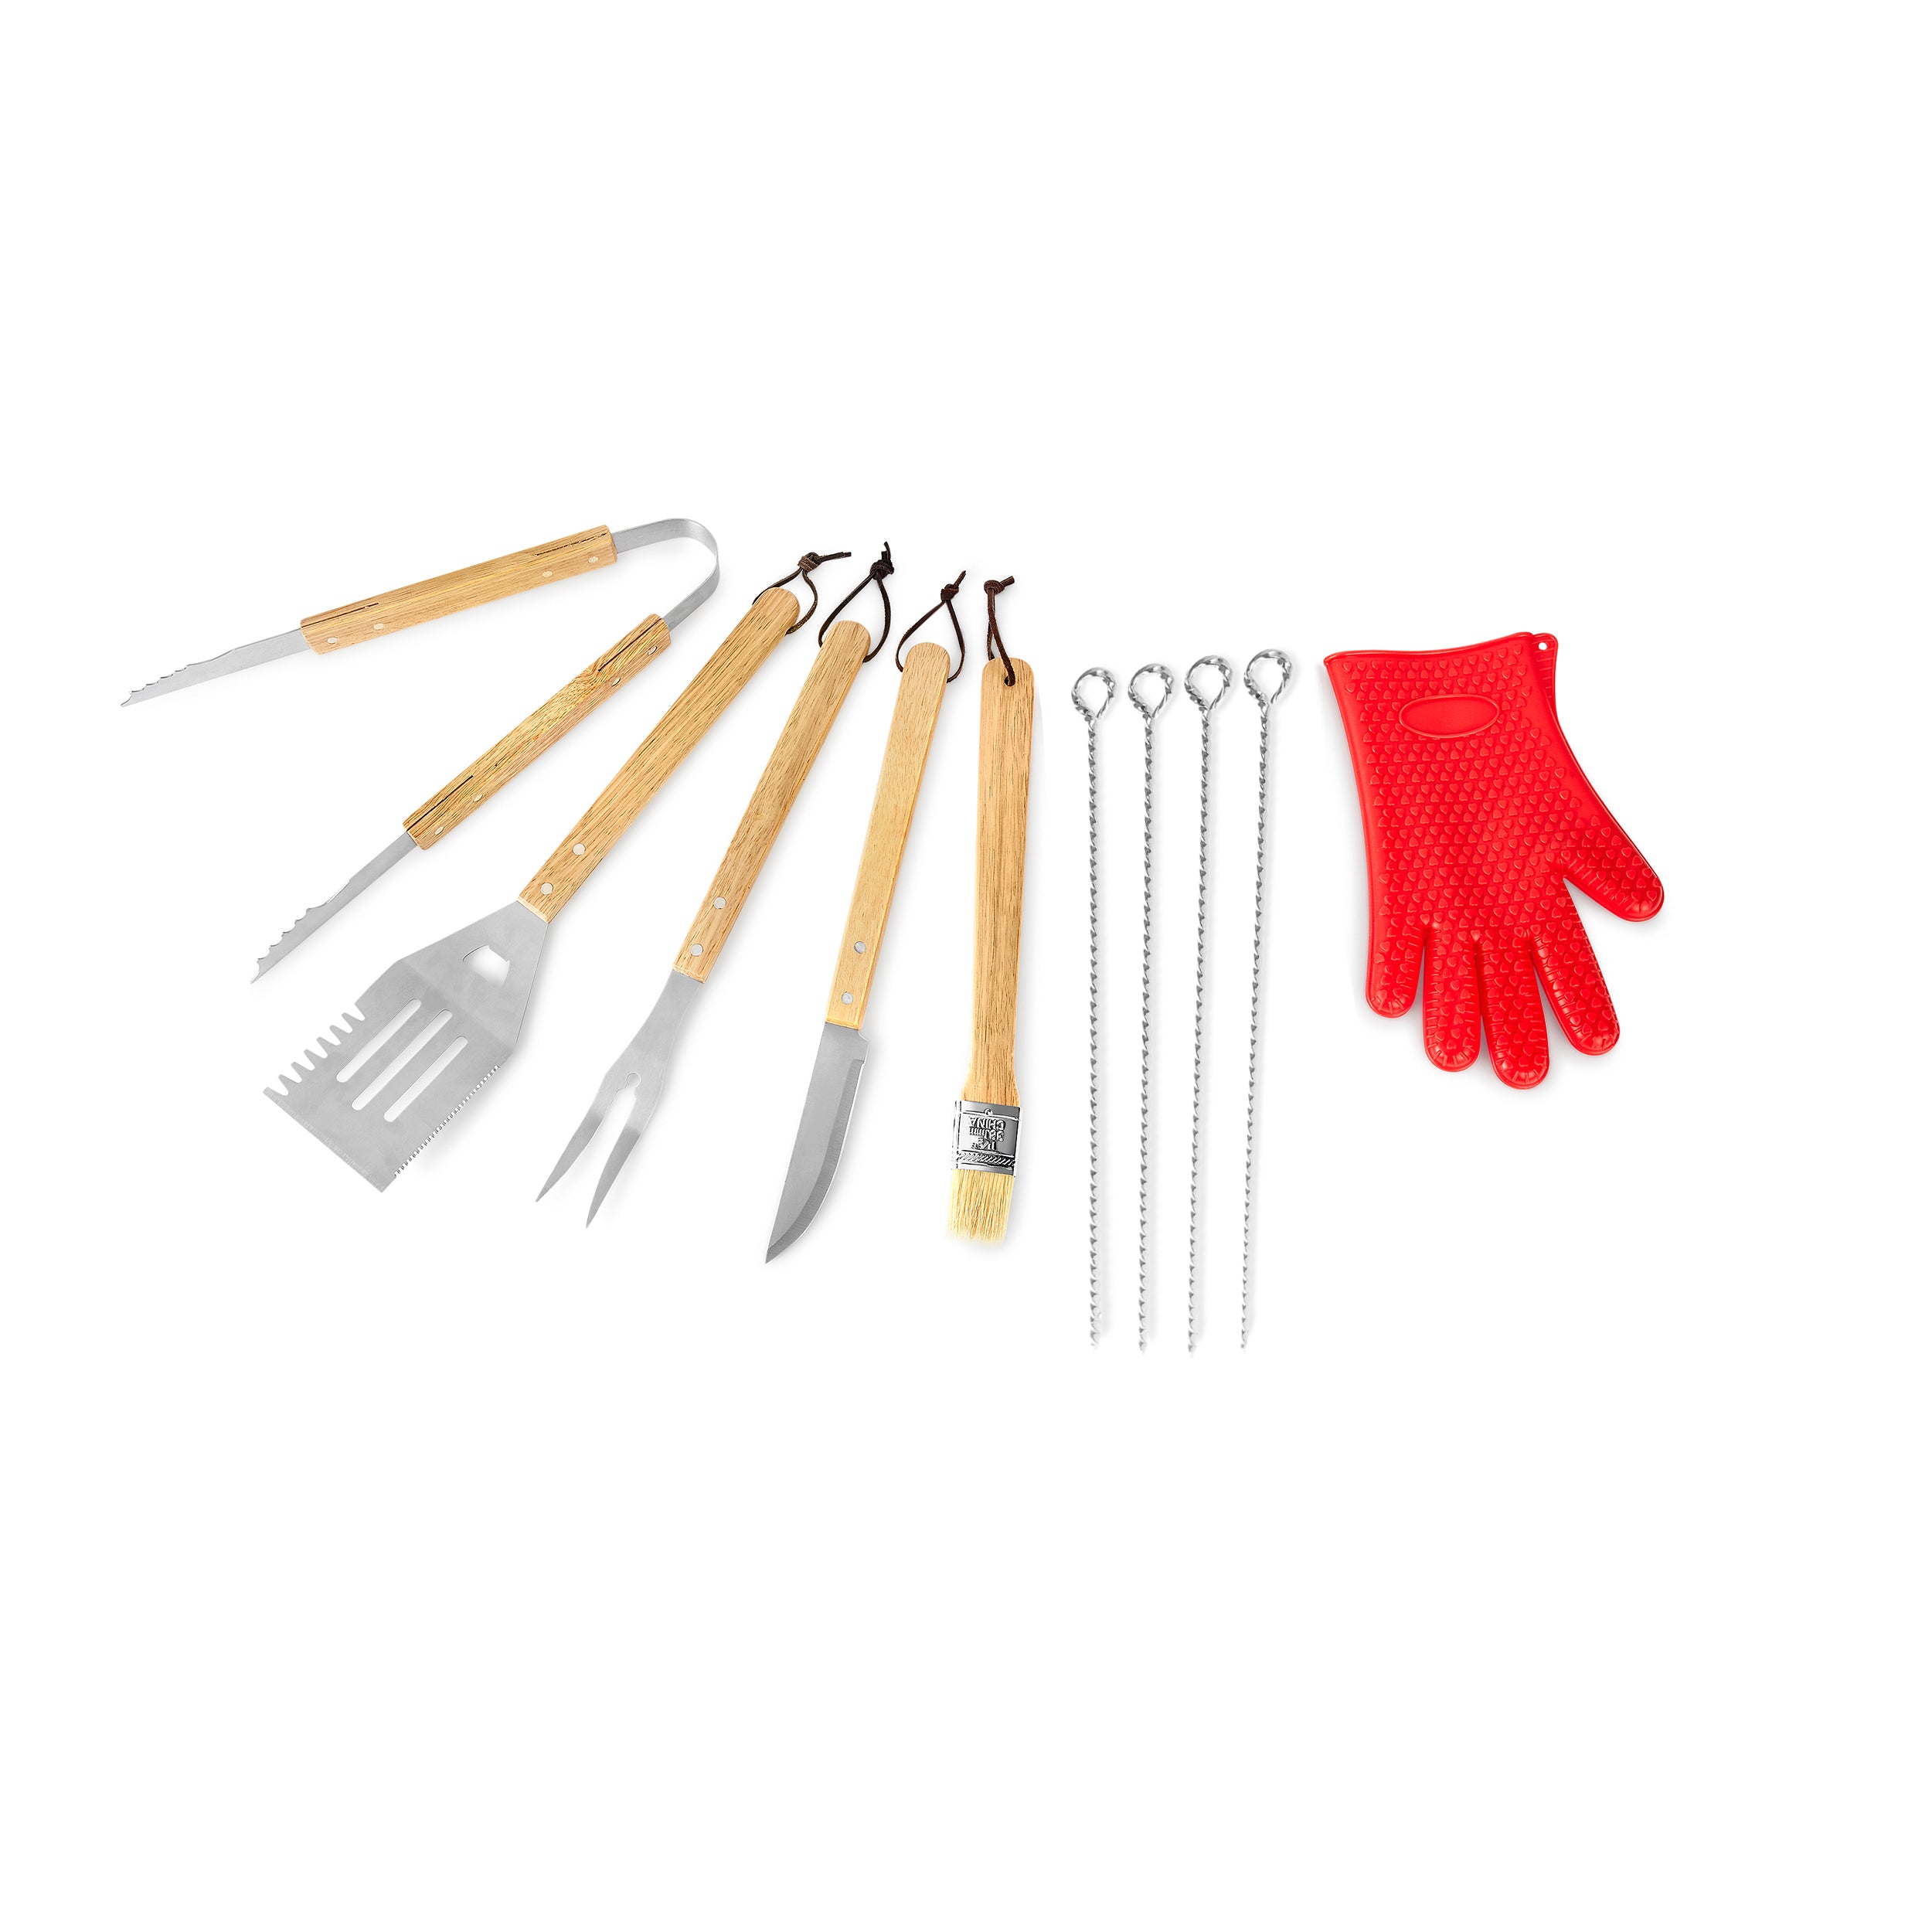 11 Piece BBQ Grill Set for BBQ